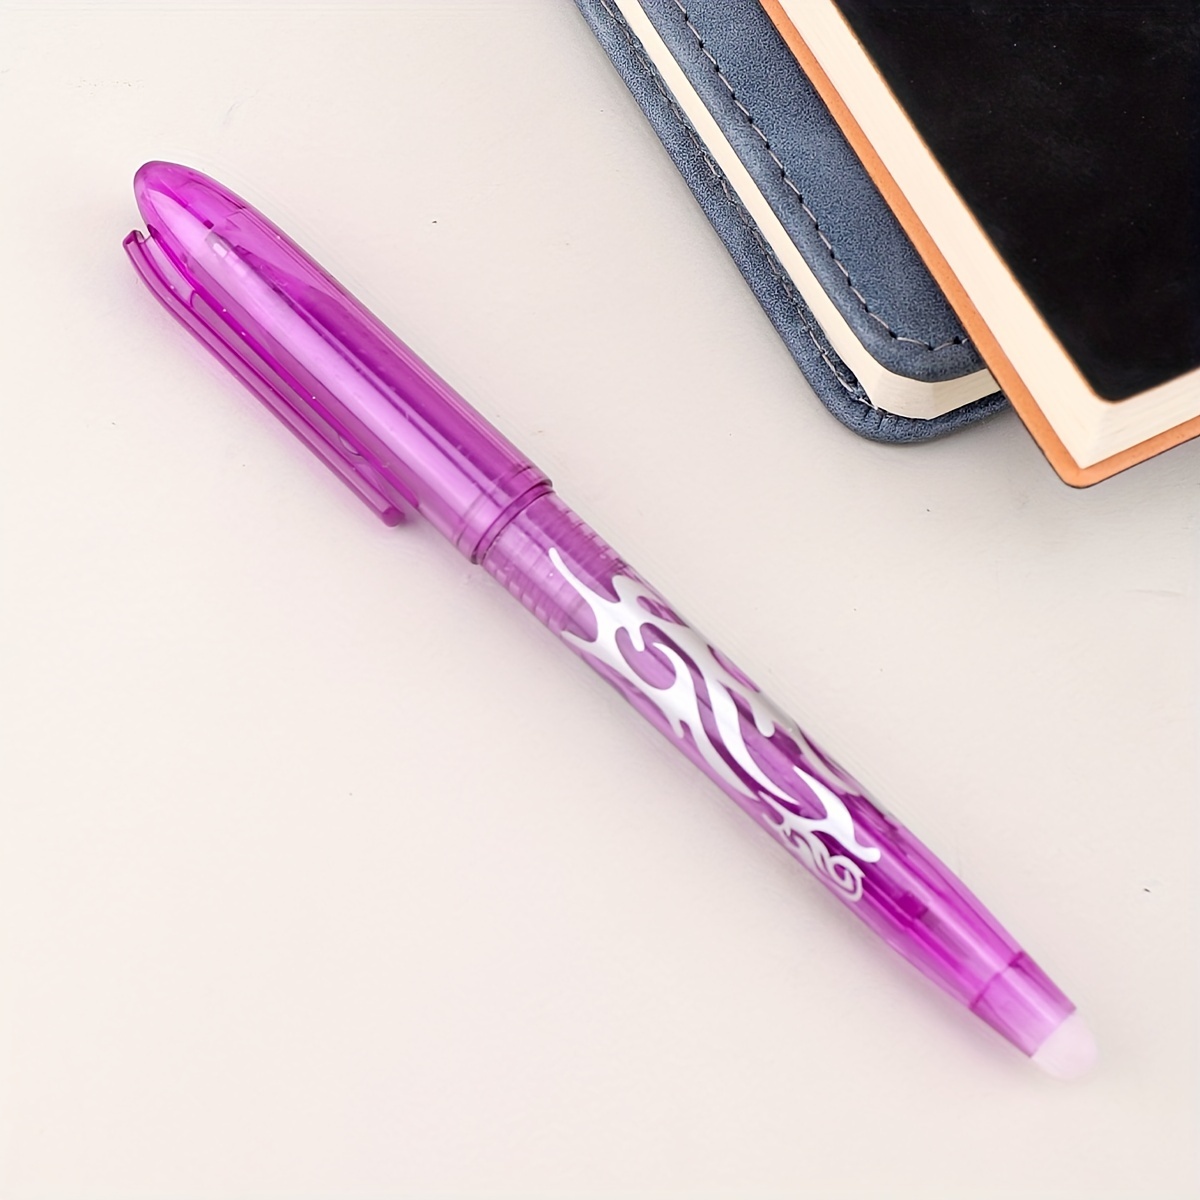 🌷✨ what are your thoughts on erasable gel pens?? #stationery